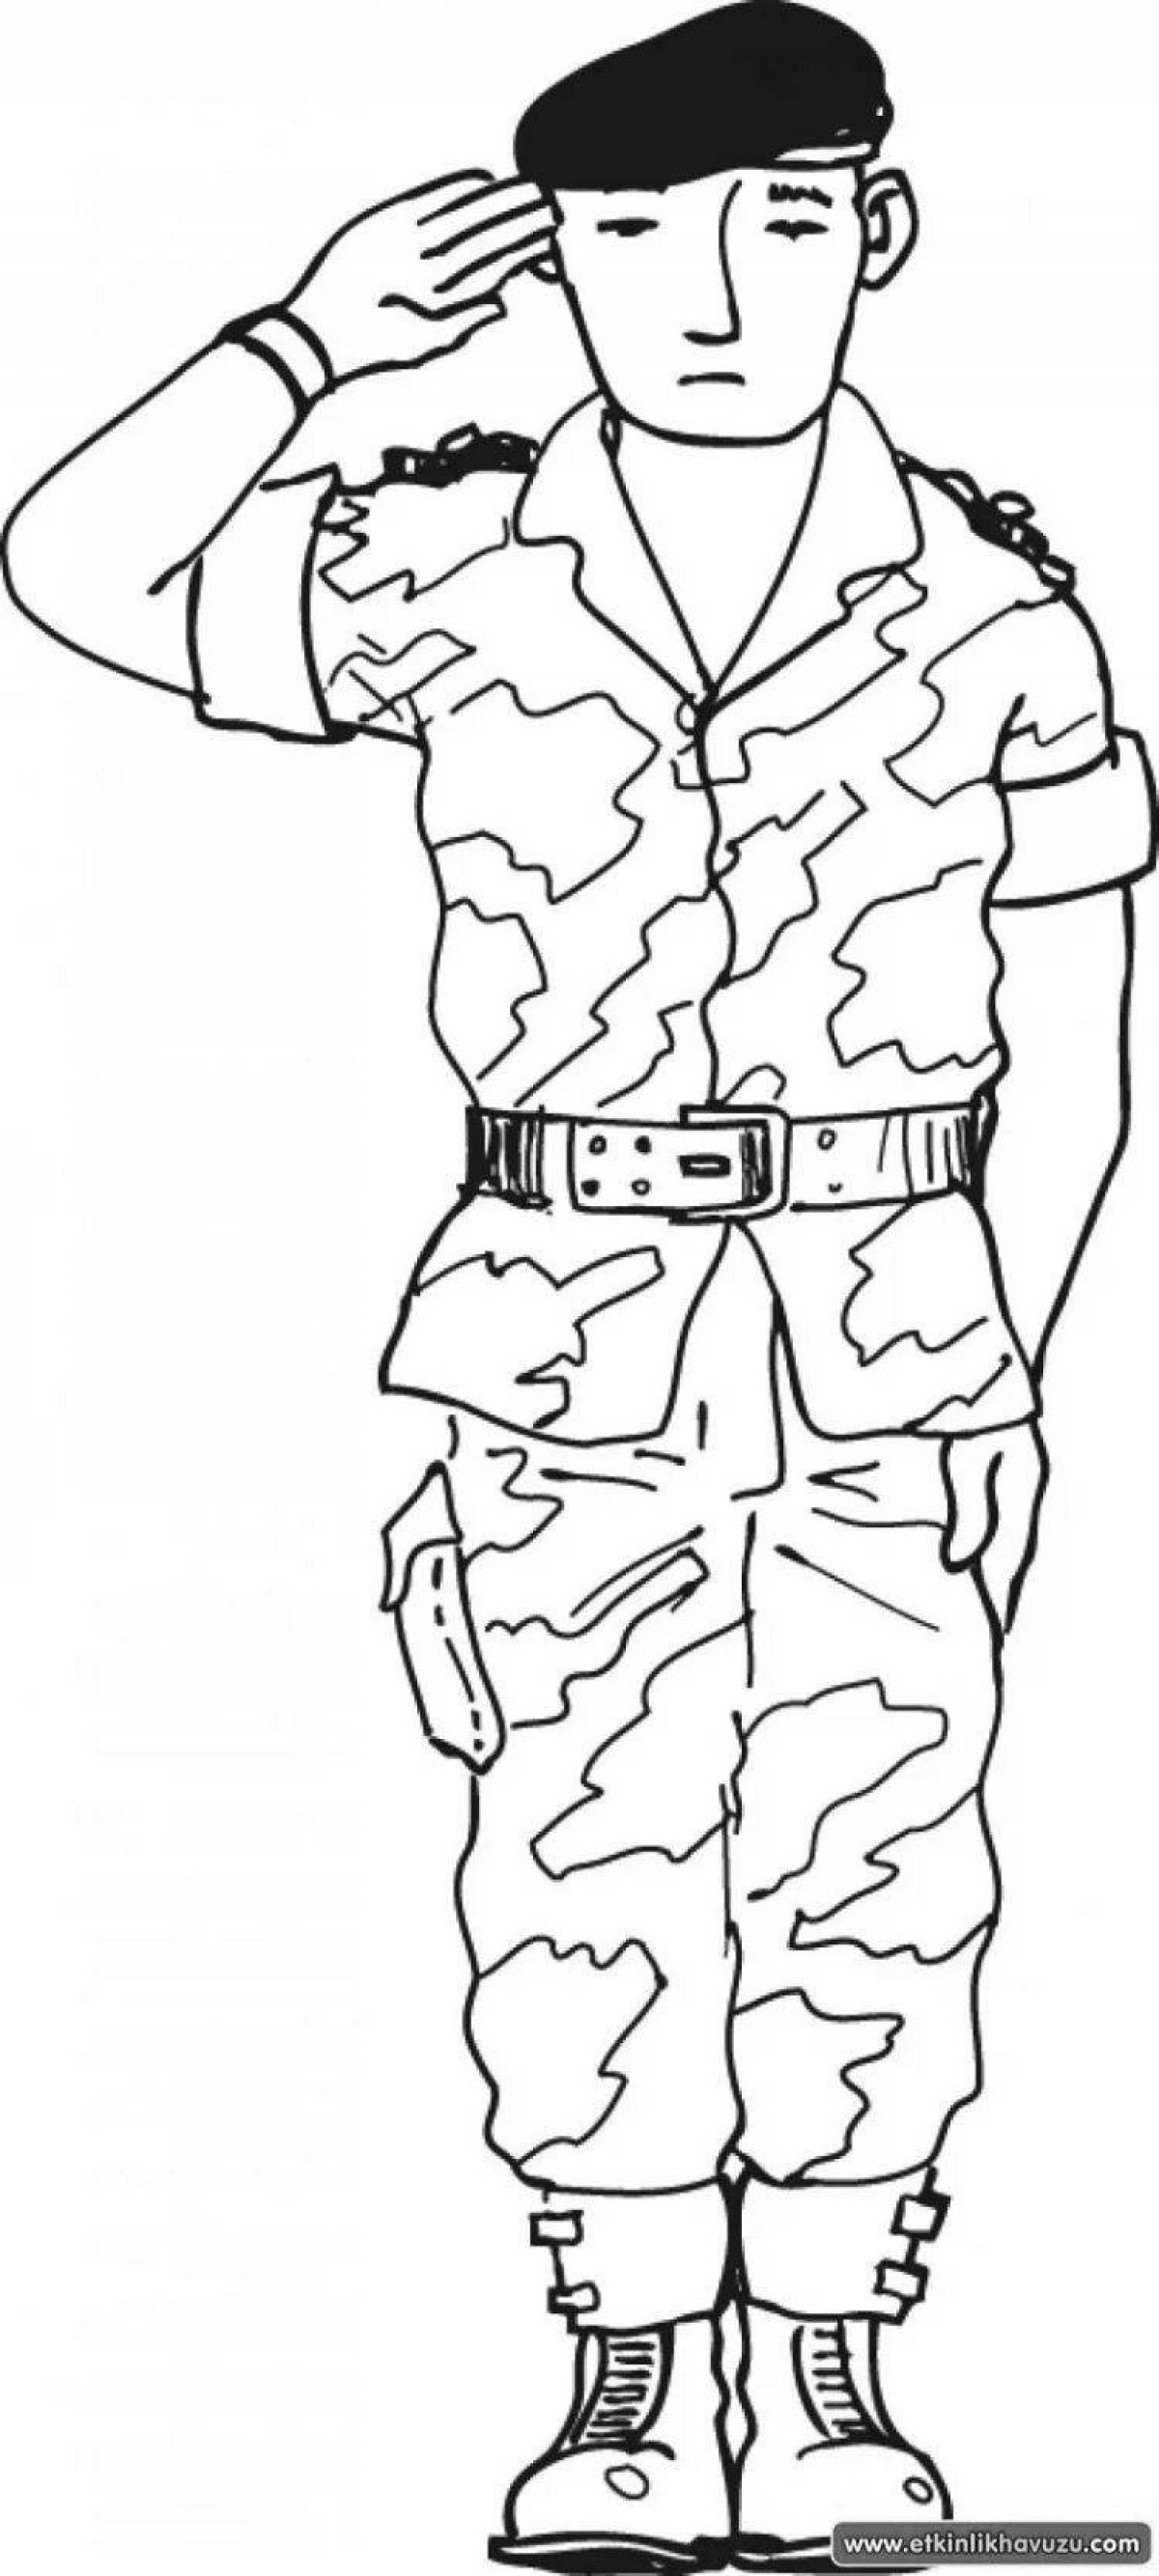 Adorable Russian soldier coloring page for kids